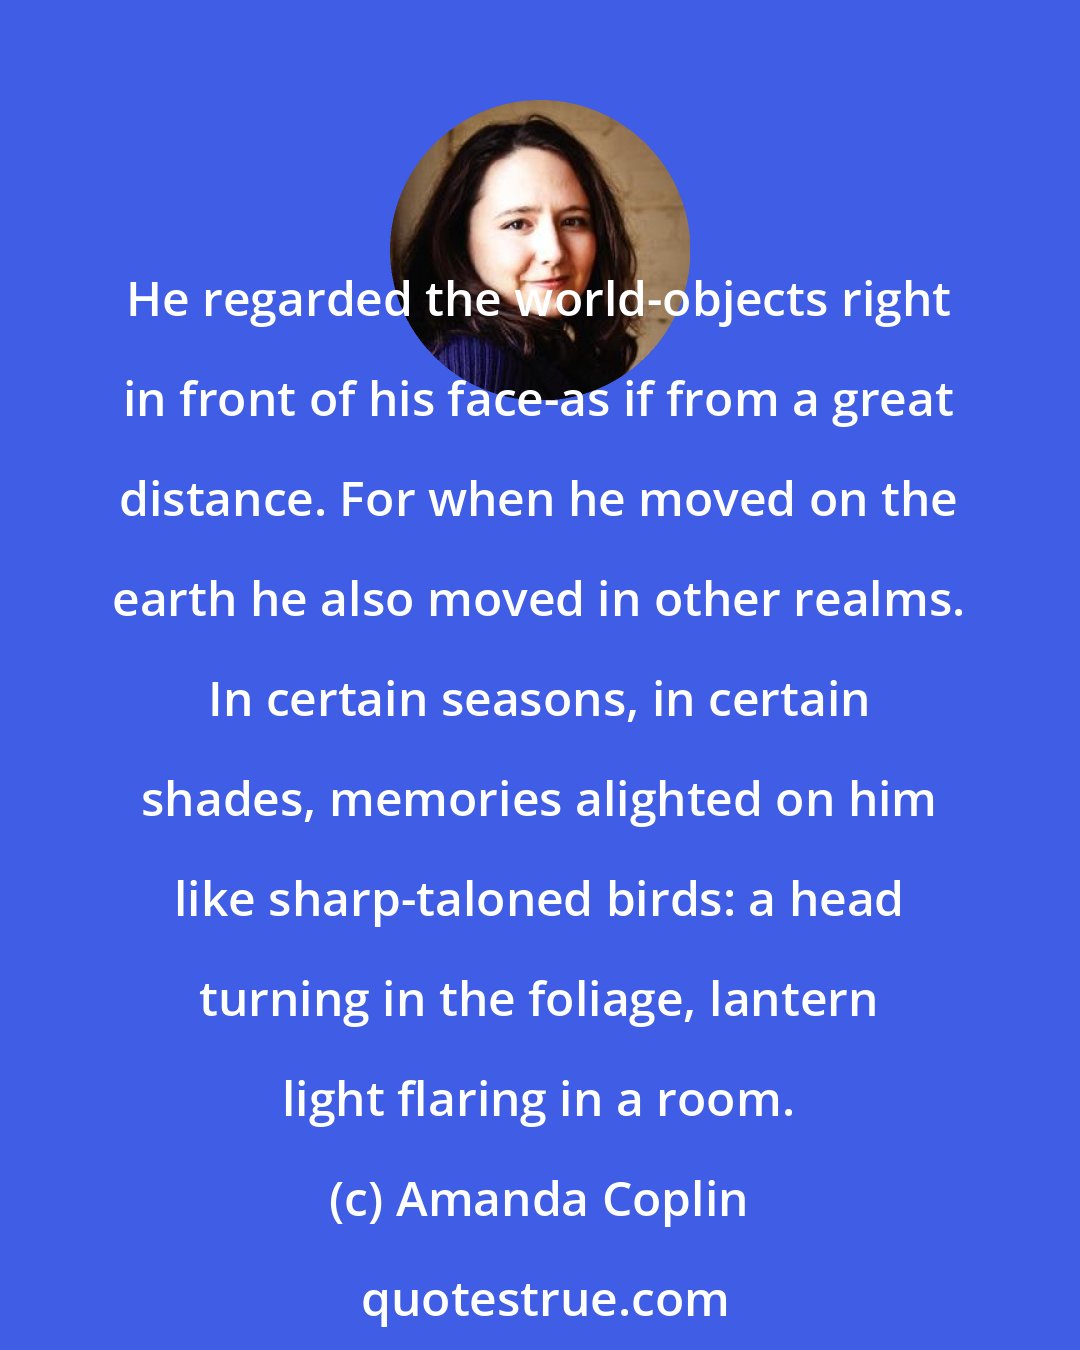 Amanda Coplin: He regarded the world-objects right in front of his face-as if from a great distance. For when he moved on the earth he also moved in other realms. In certain seasons, in certain shades, memories alighted on him like sharp-taloned birds: a head turning in the foliage, lantern light flaring in a room.